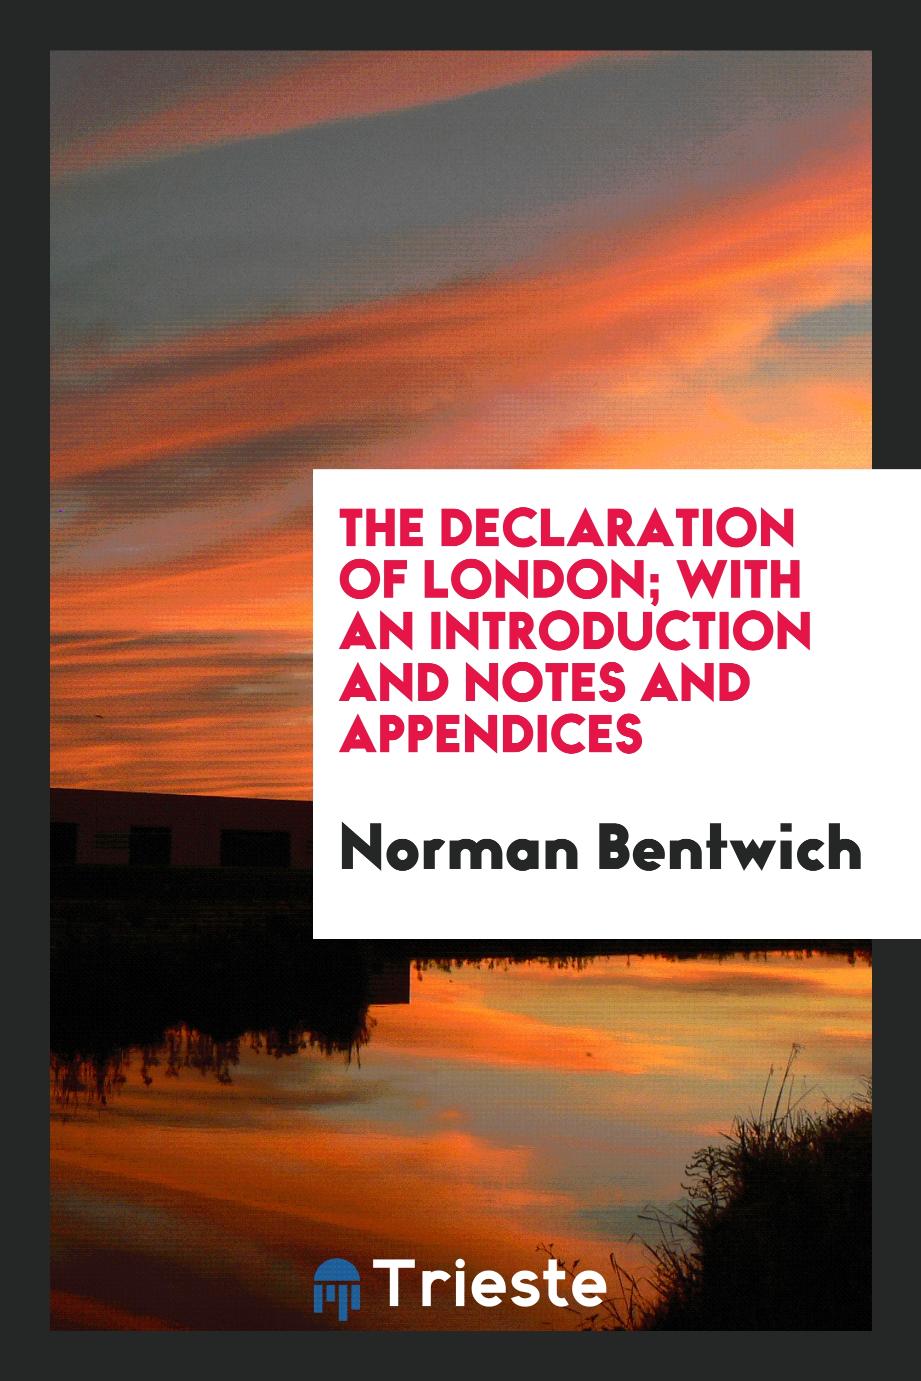 The Declaration of London; with an introduction and notes and appendices